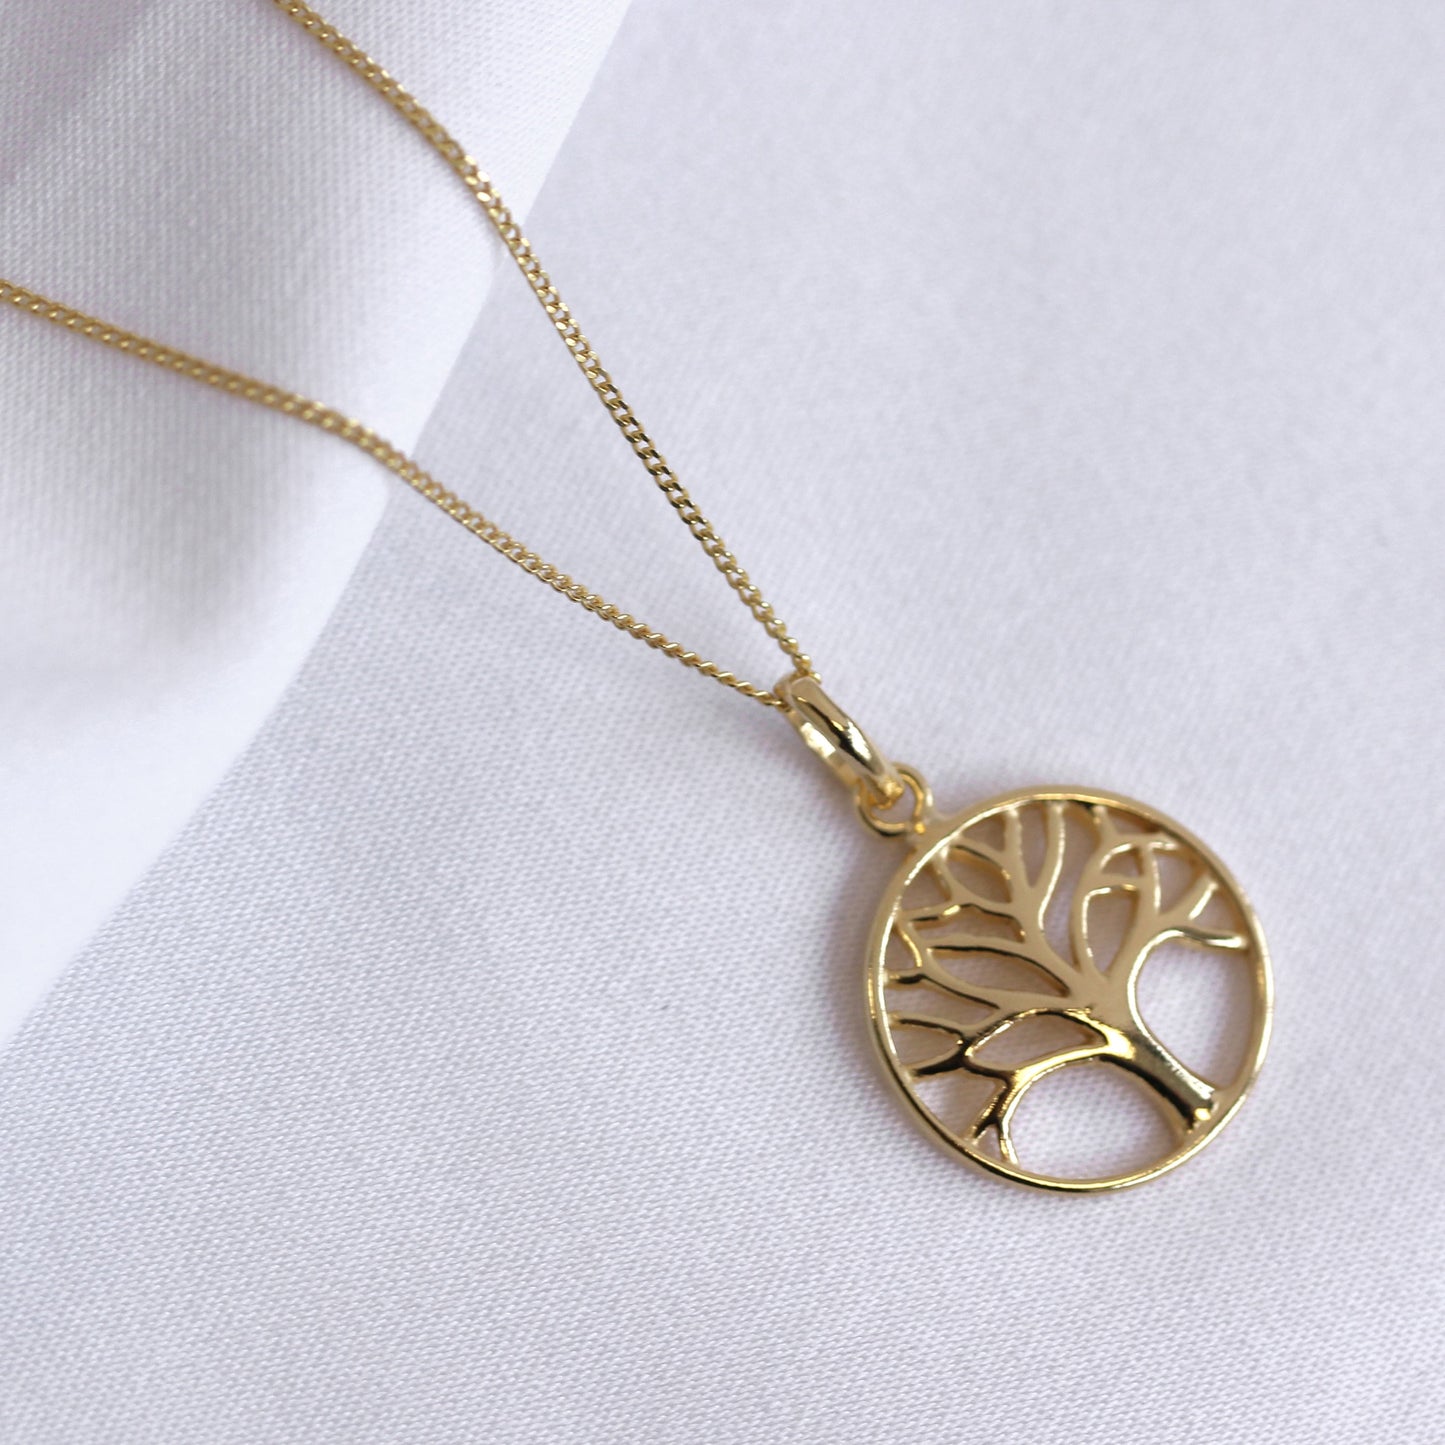 Gold Plated Sterling Silver Tree of Life Necklace 14-32 Inch